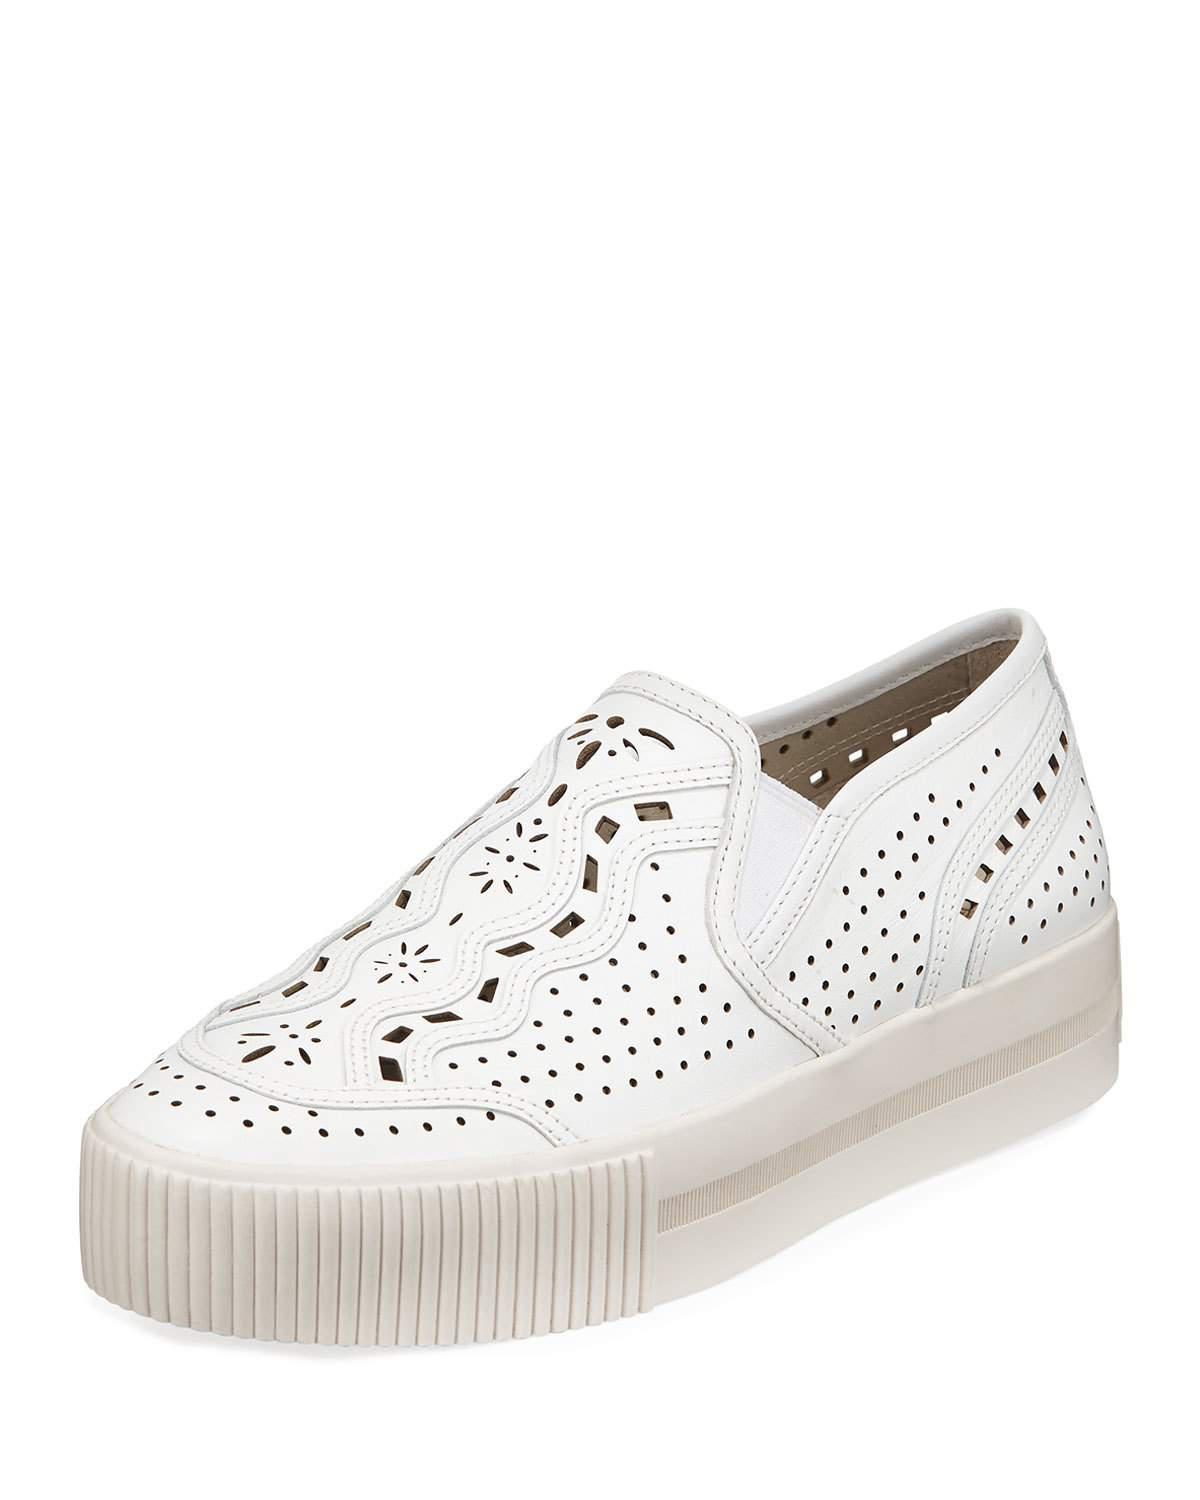 Ash Kingston Leather Sneakers in White 